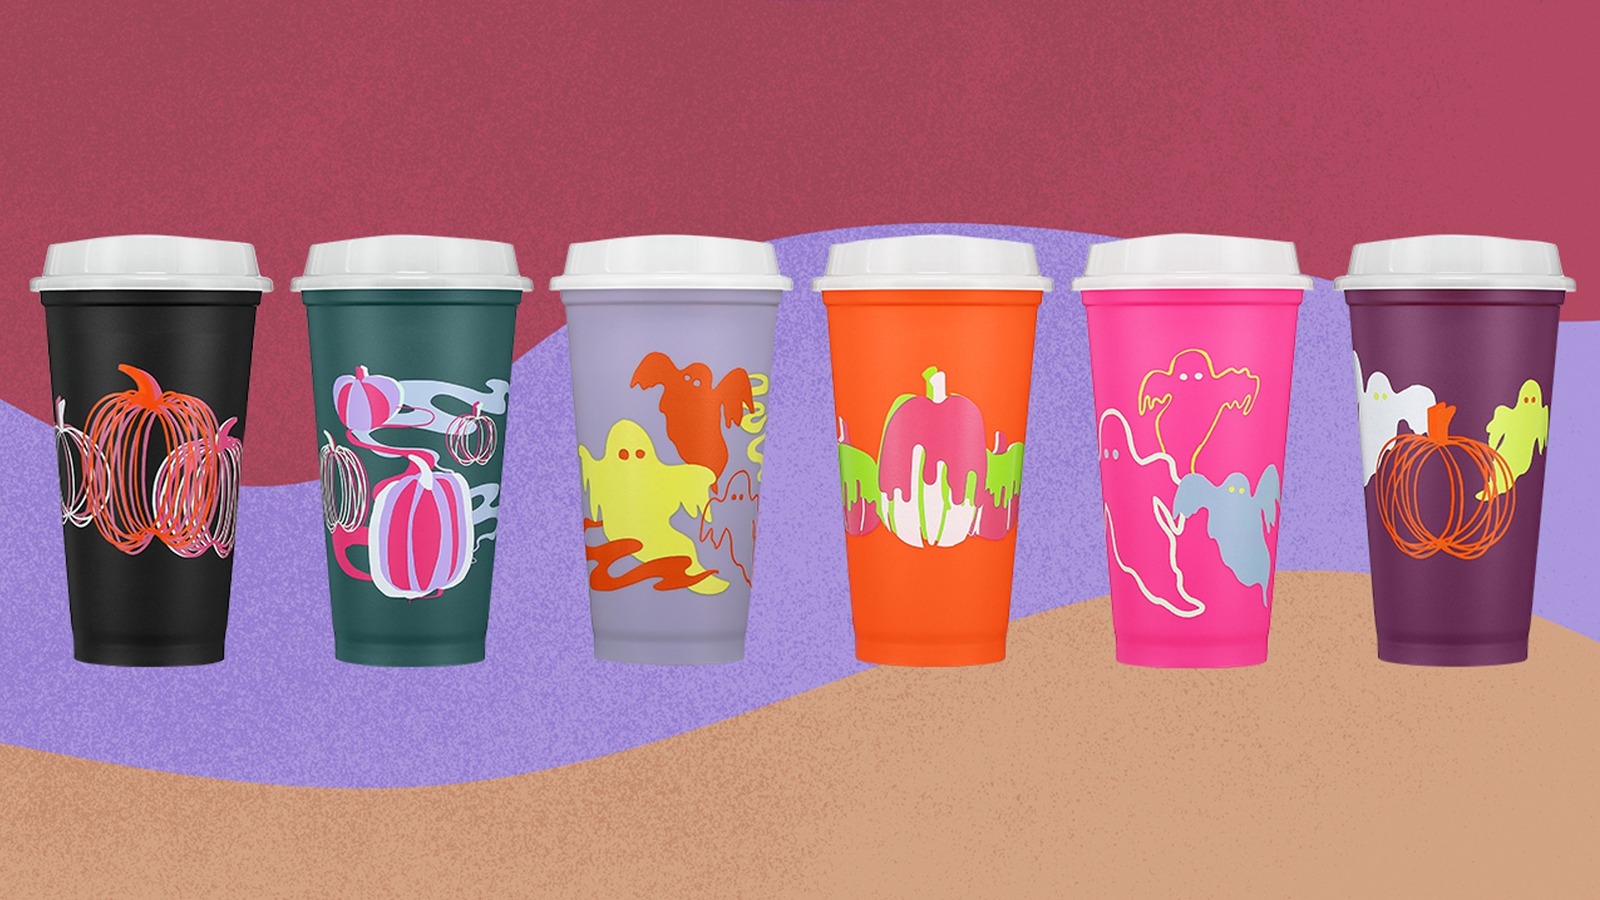 https://www.mashed.com/img/gallery/starbucks-embraces-spooktember-and-unveils-halloween-cups-early/l-intro-1694536768.jpg